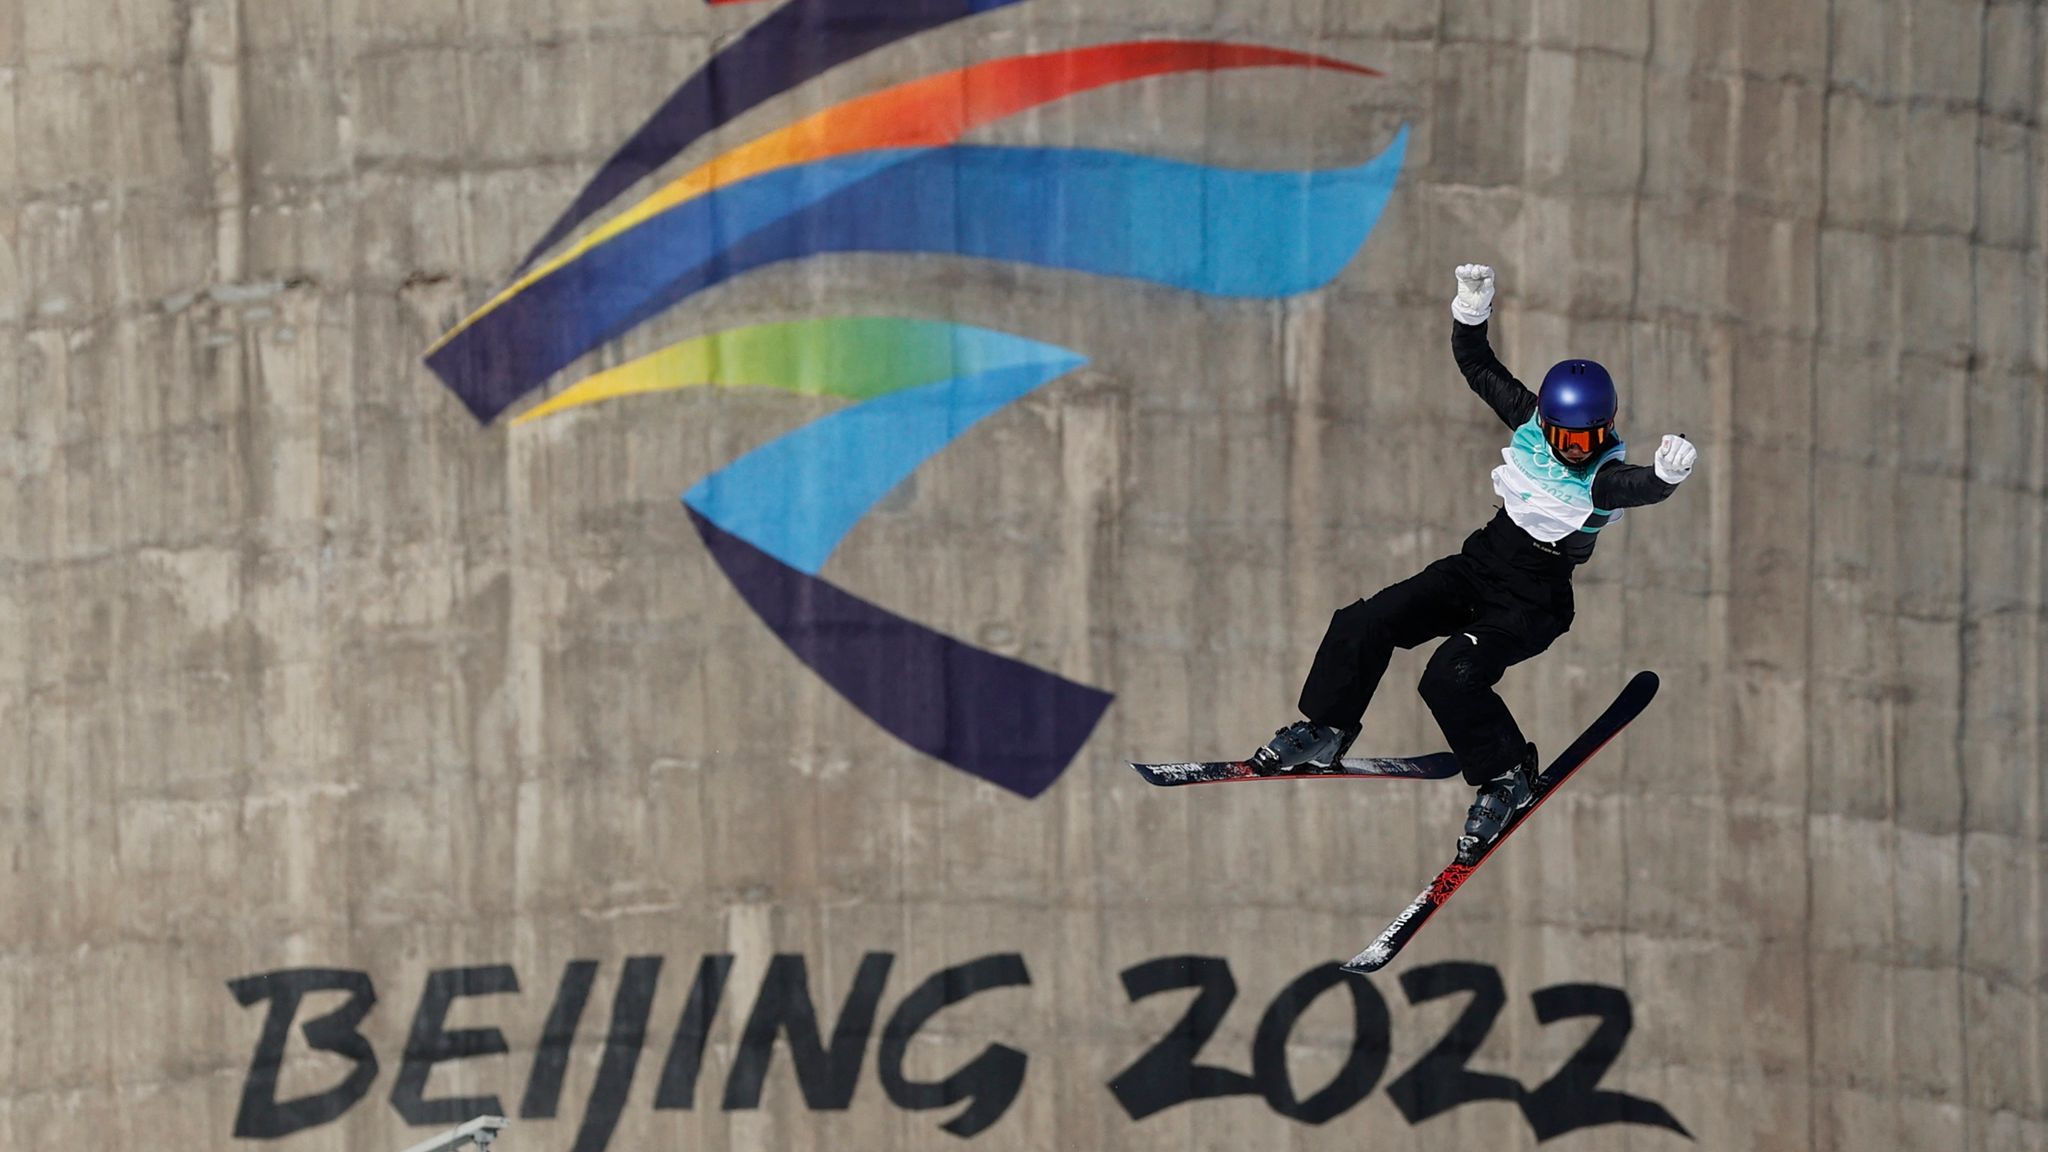 2022 Winter Olympics Freestyle skier Eileen Gu causes controversy as